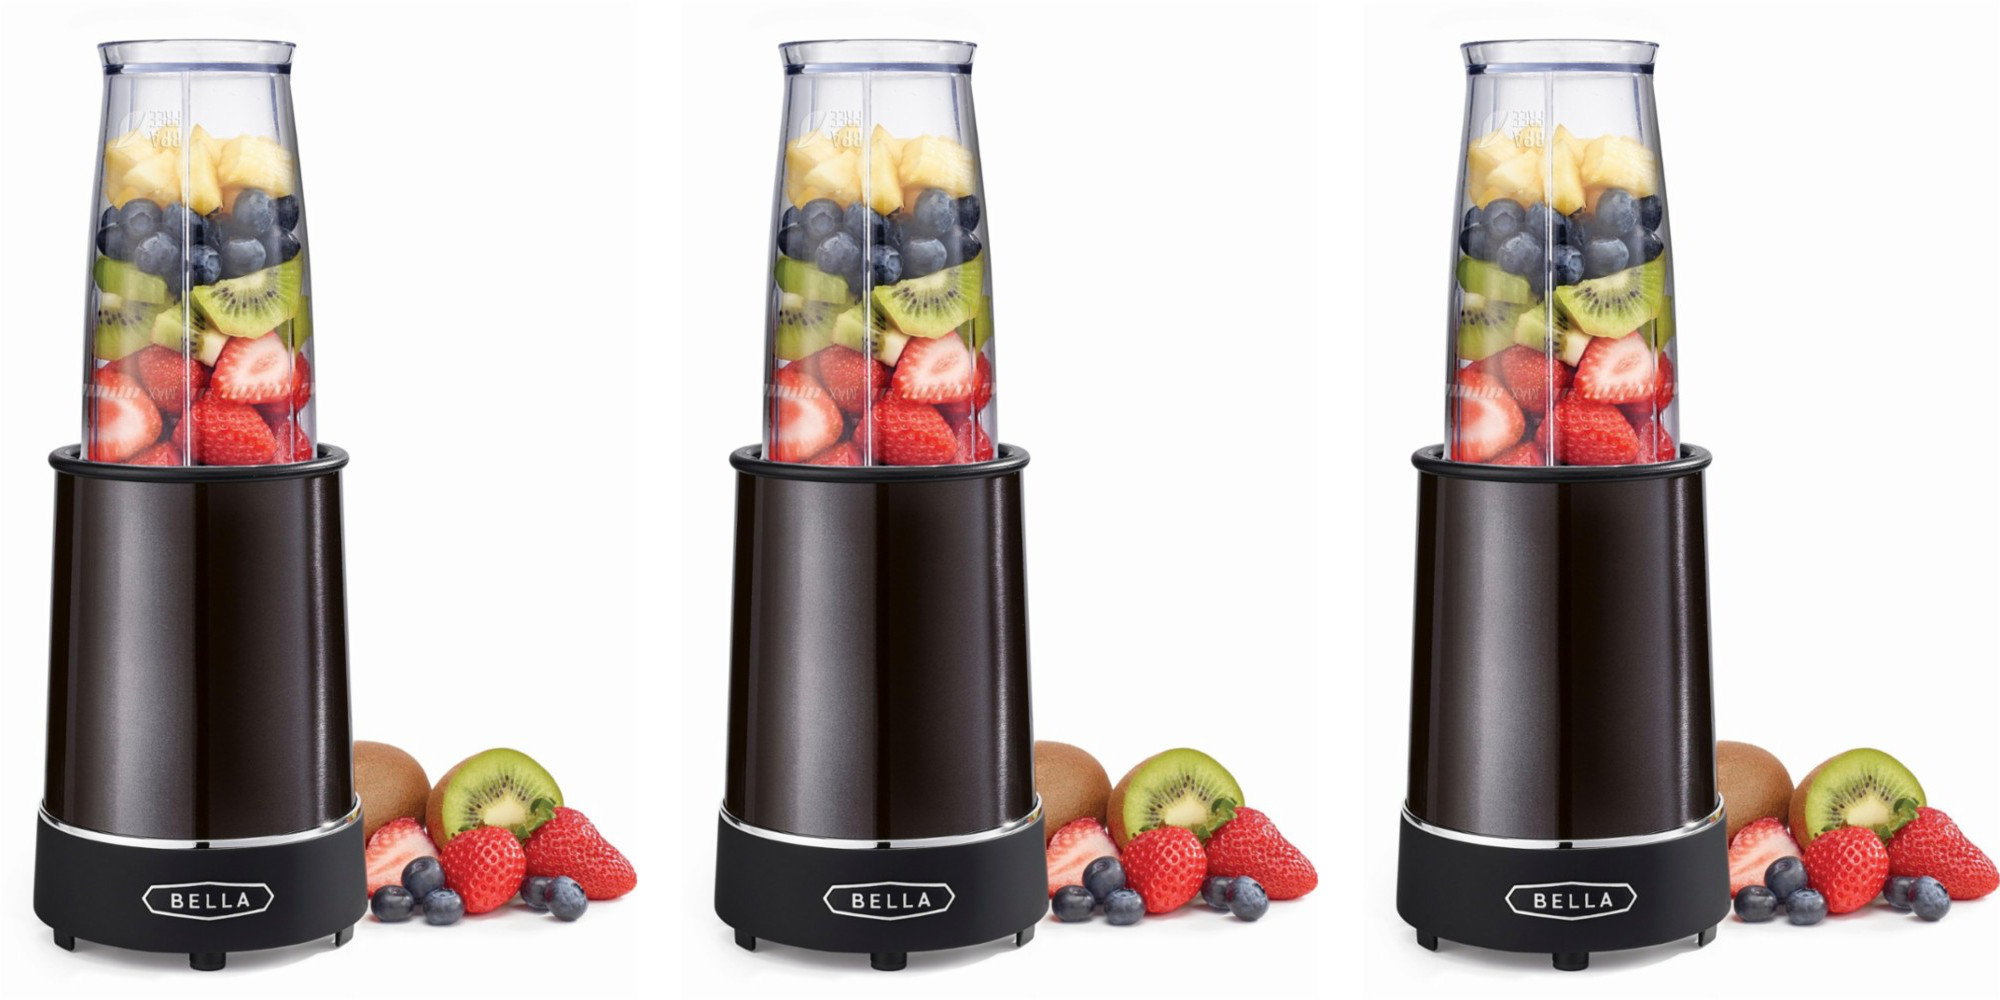 Bella Rocket Blenders now up to 50% off starting from $15 (today only) .